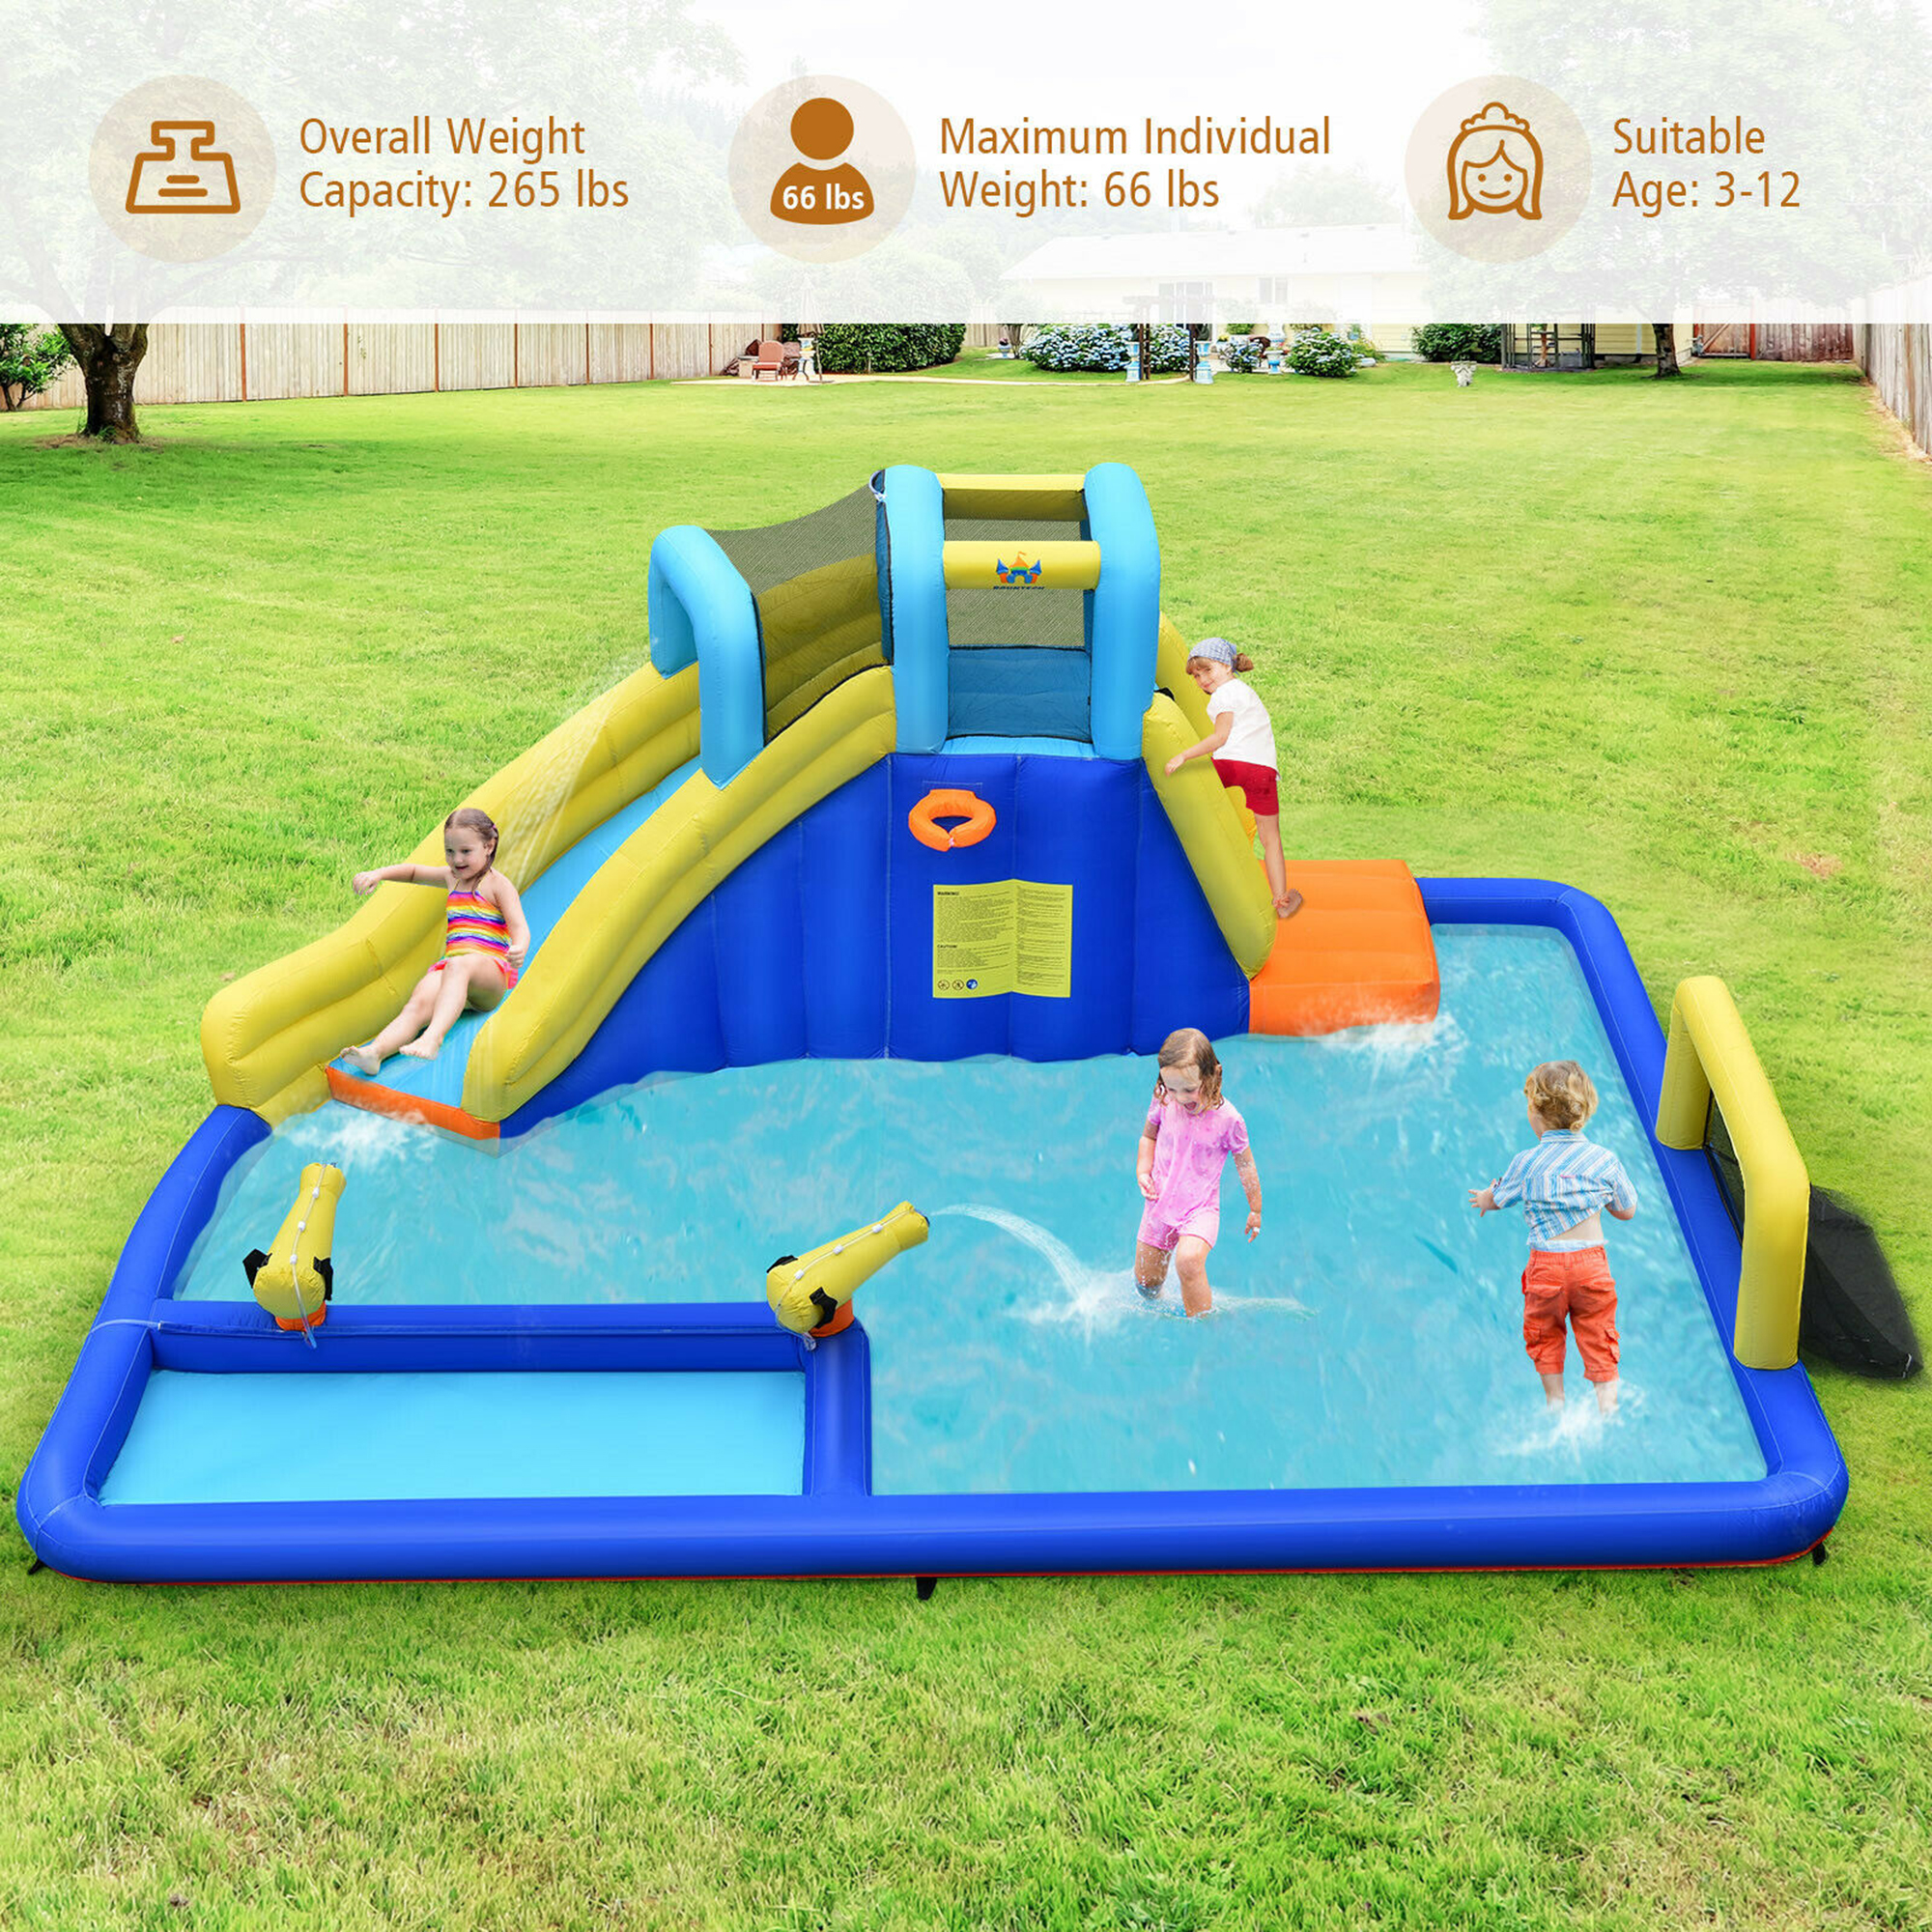 Gymax Inflatable Water Slide Bounce House Climbing Wall without Blower - image 5 of 10